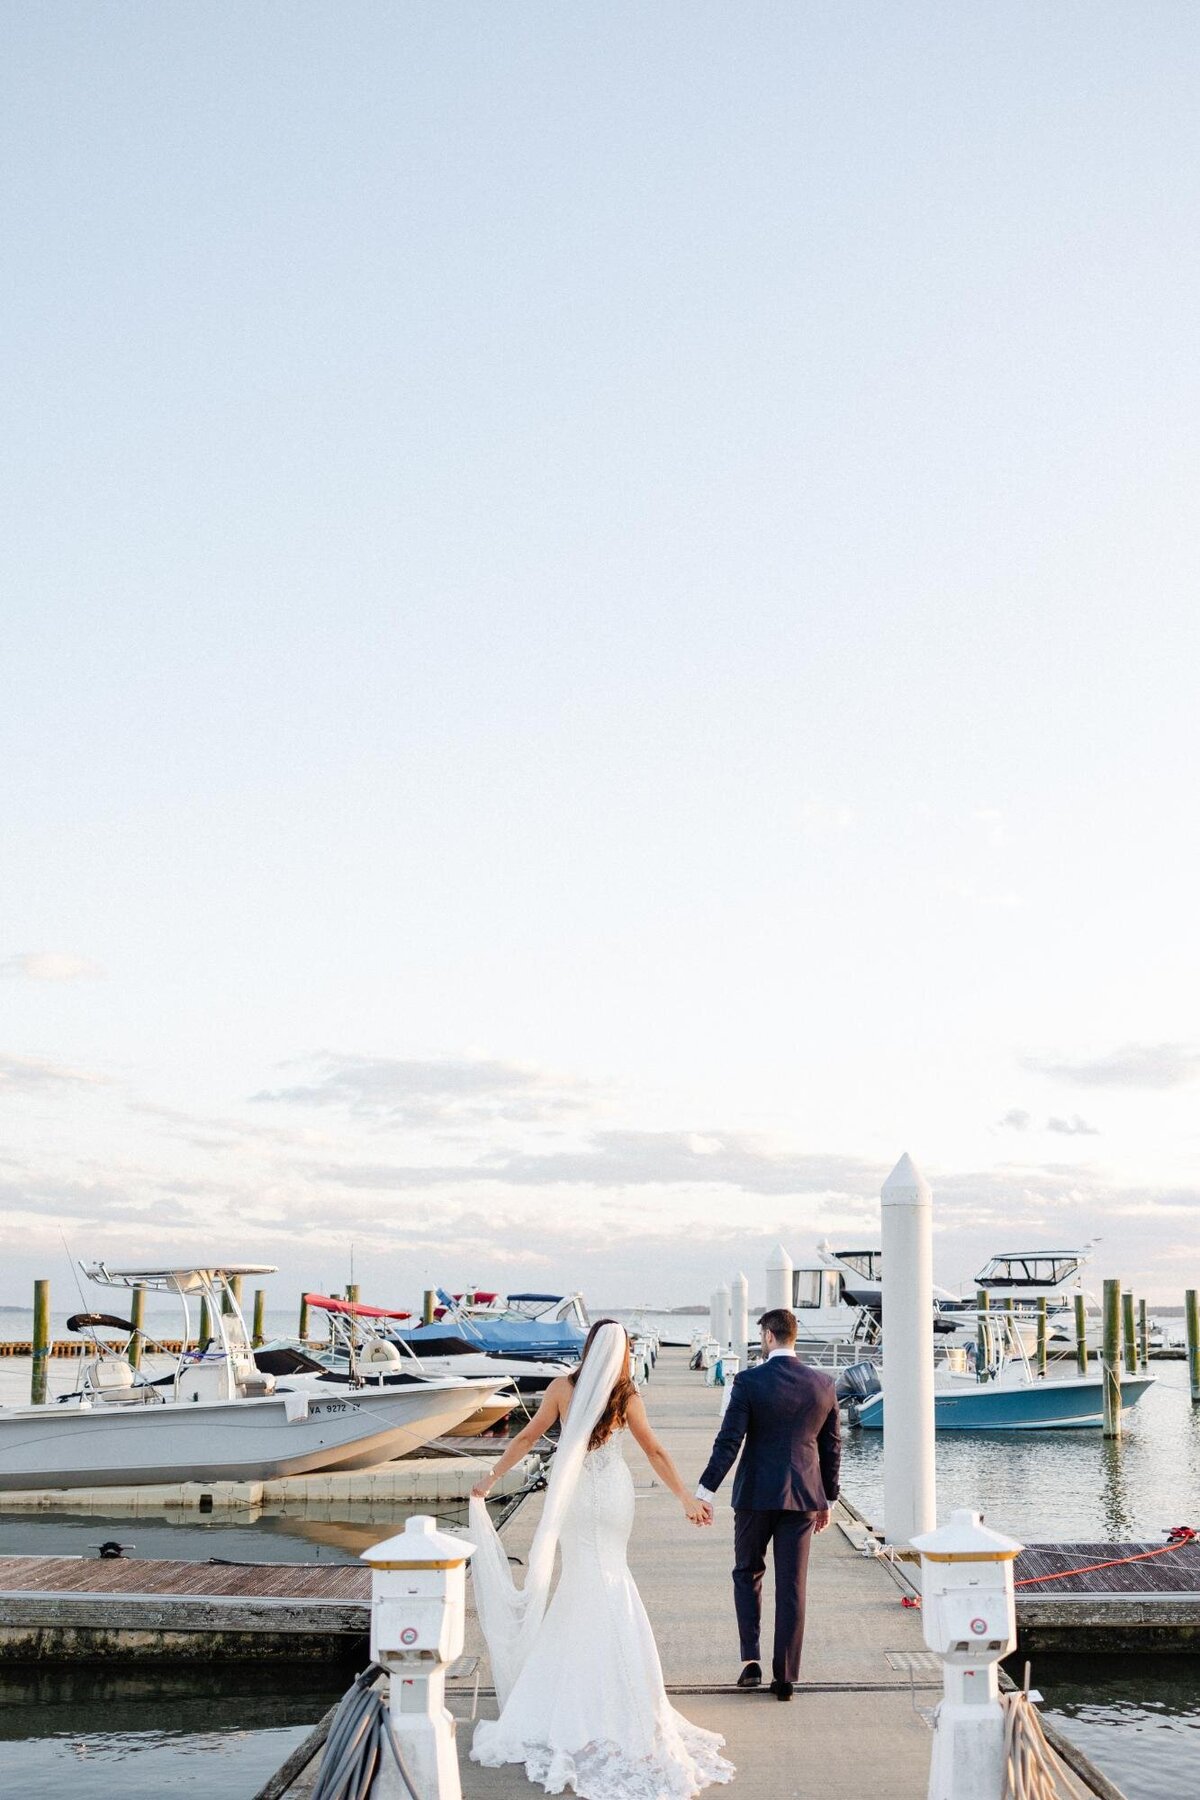 A bride and groom holding hands and walking towards a marina.